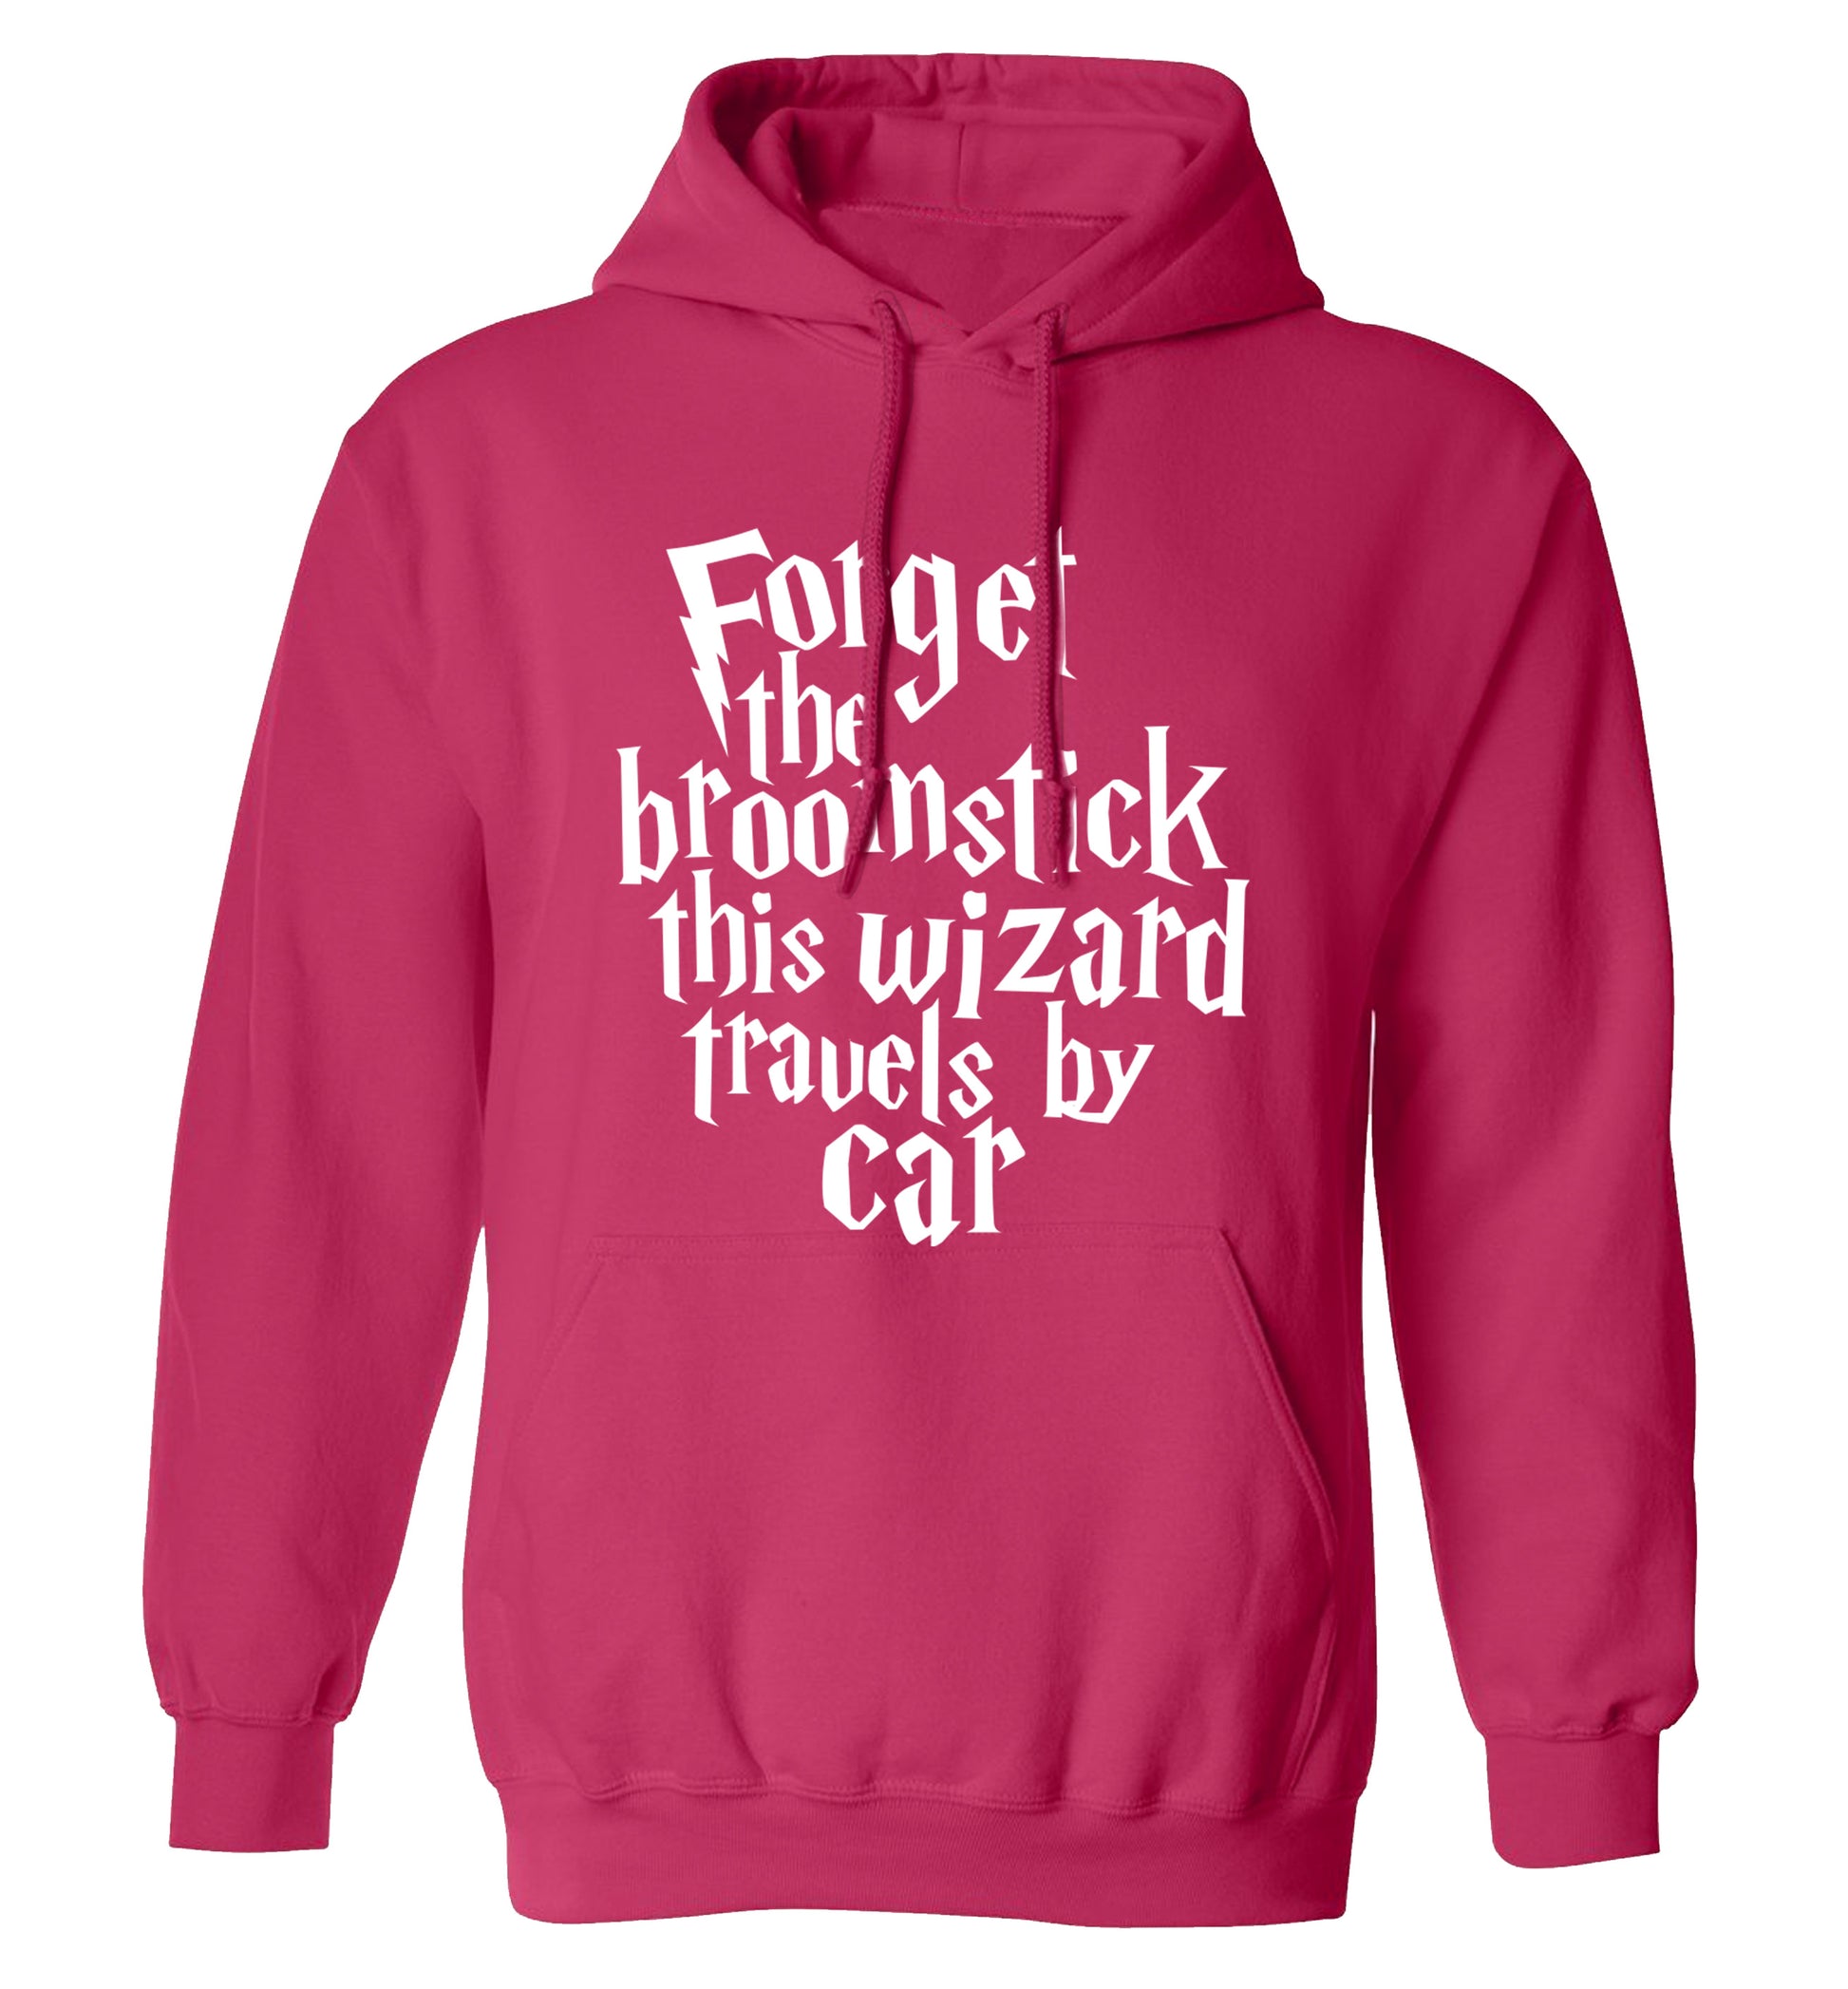 Forget the broomstick this wizard travels by car adults unisexpink hoodie 2XL